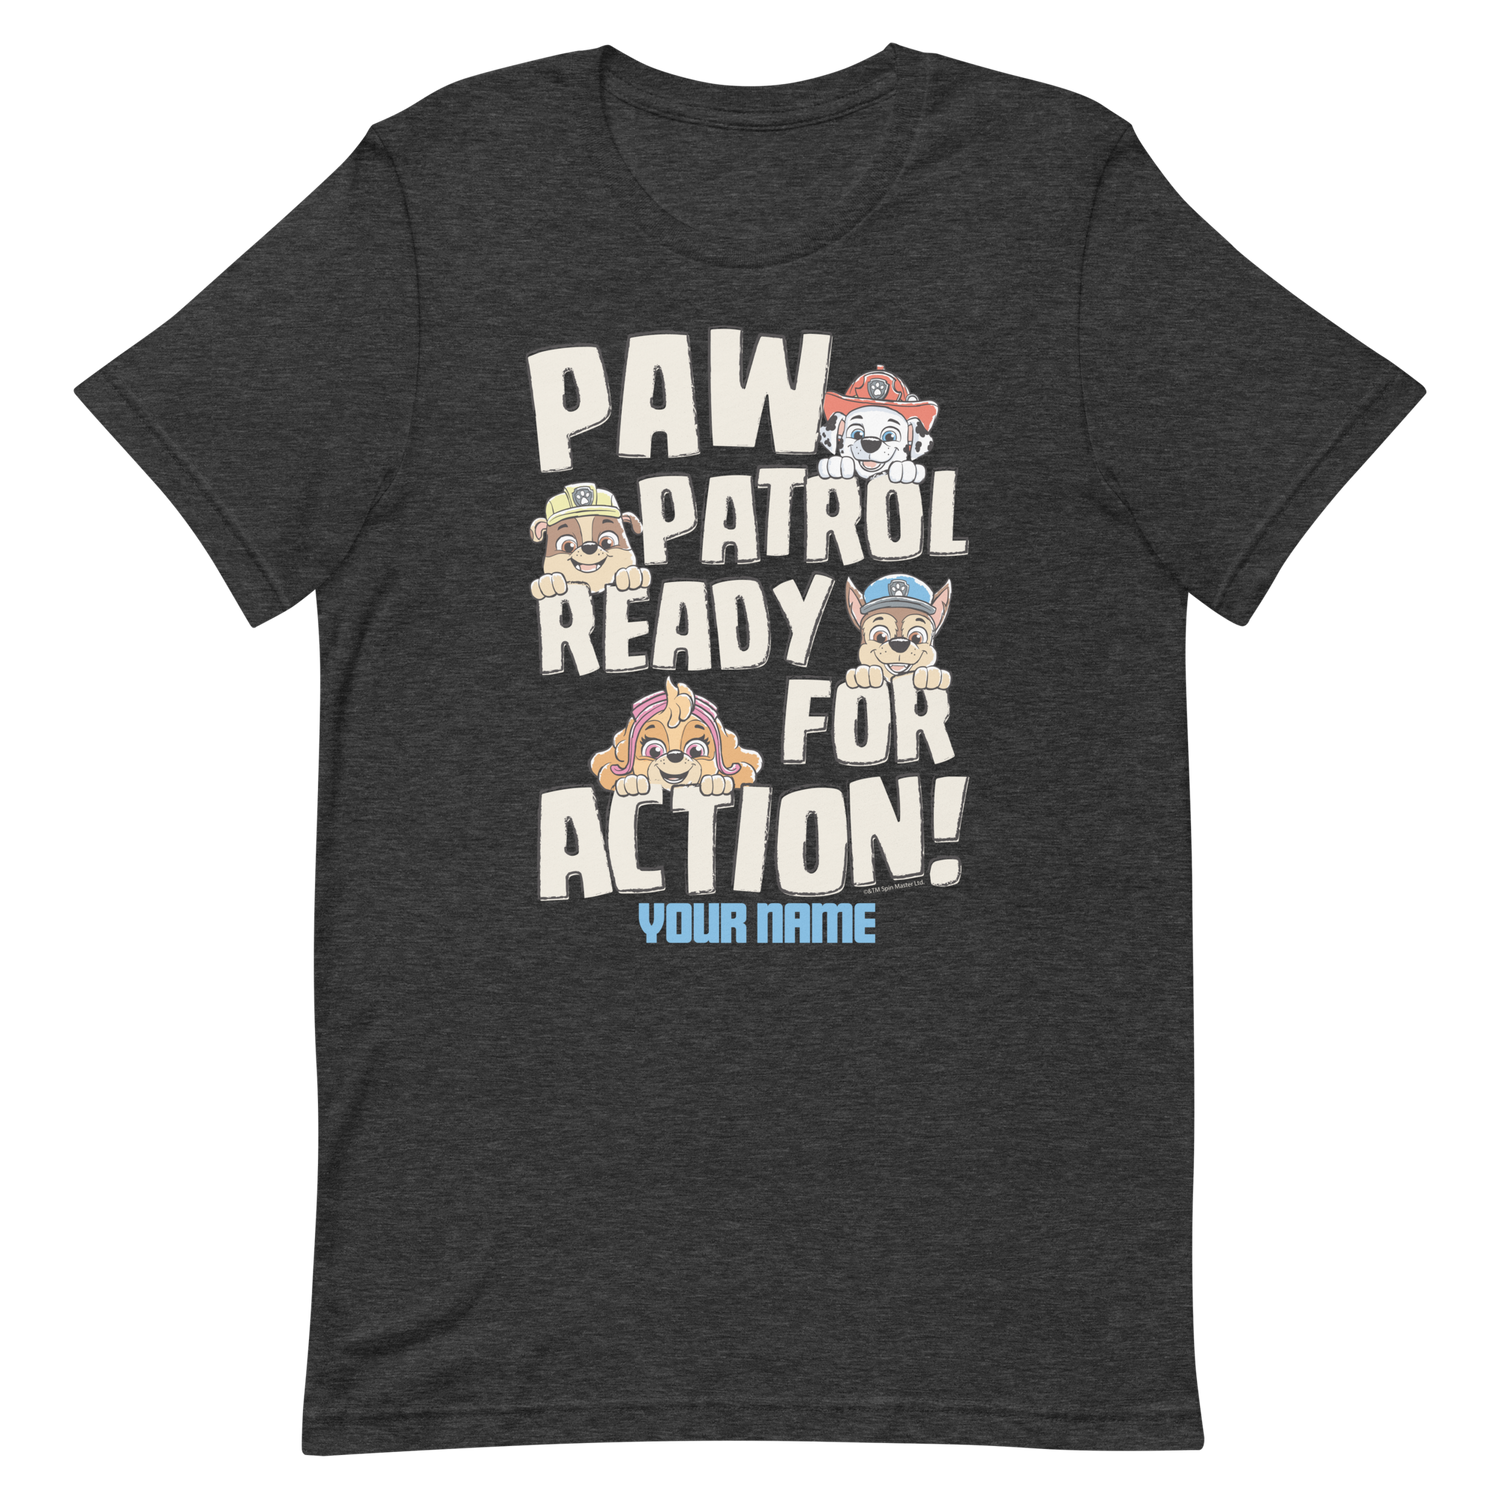 PAW Patrol Ready For Action – Sleeve Shop Short Personalized T-Shirt Paramount Adult